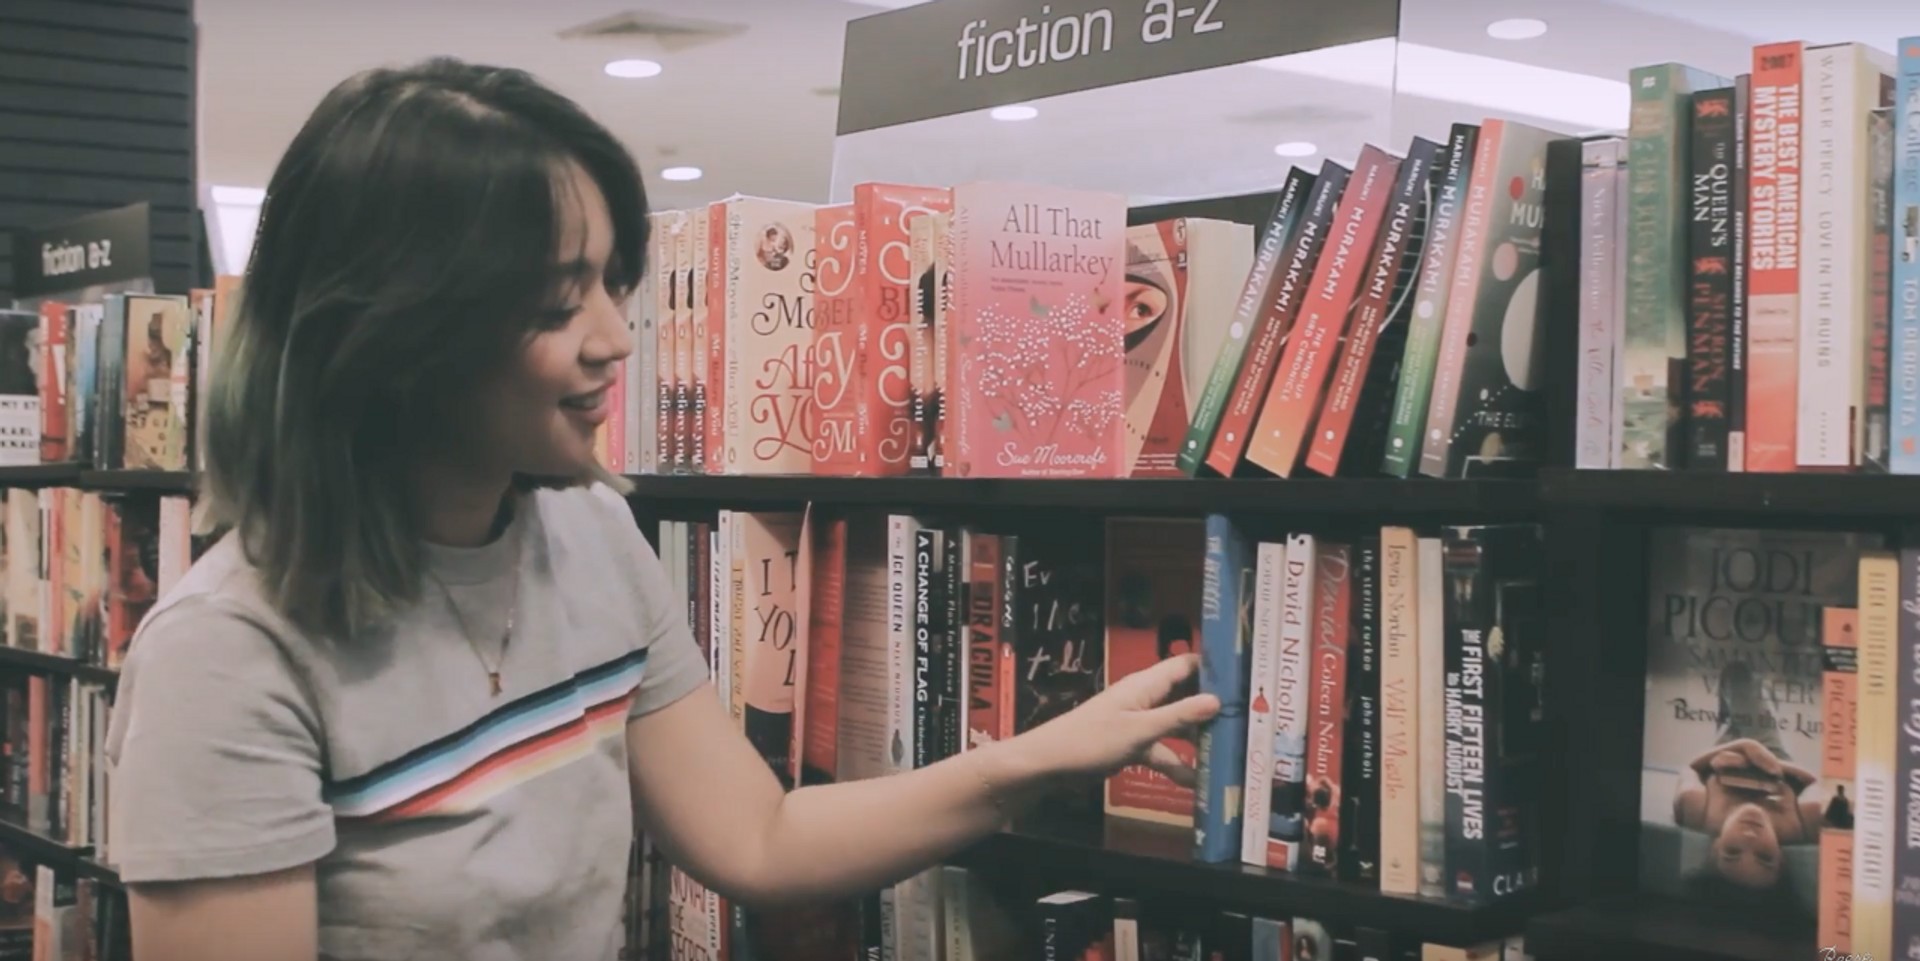 Reese Lansangan takes the #ArigatoInternetHunt to Fully Booked stores